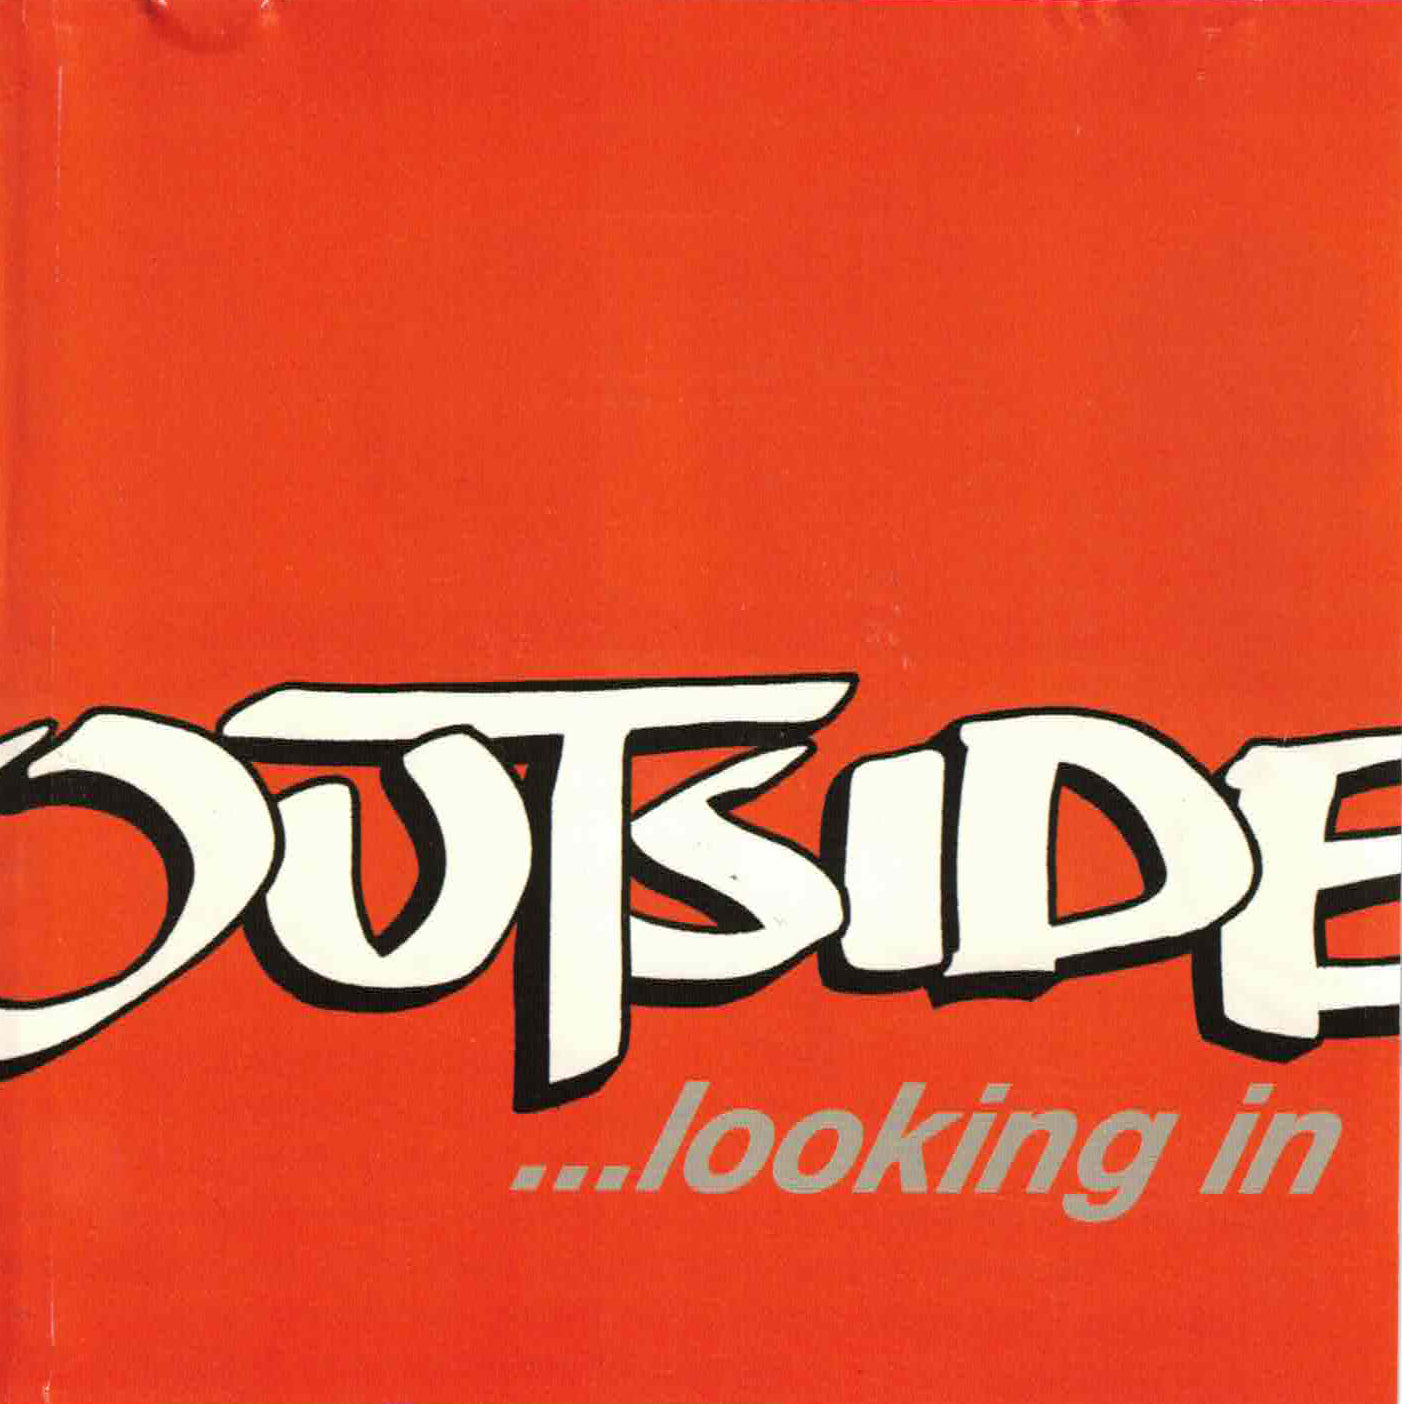 Outside - "Look to the side"